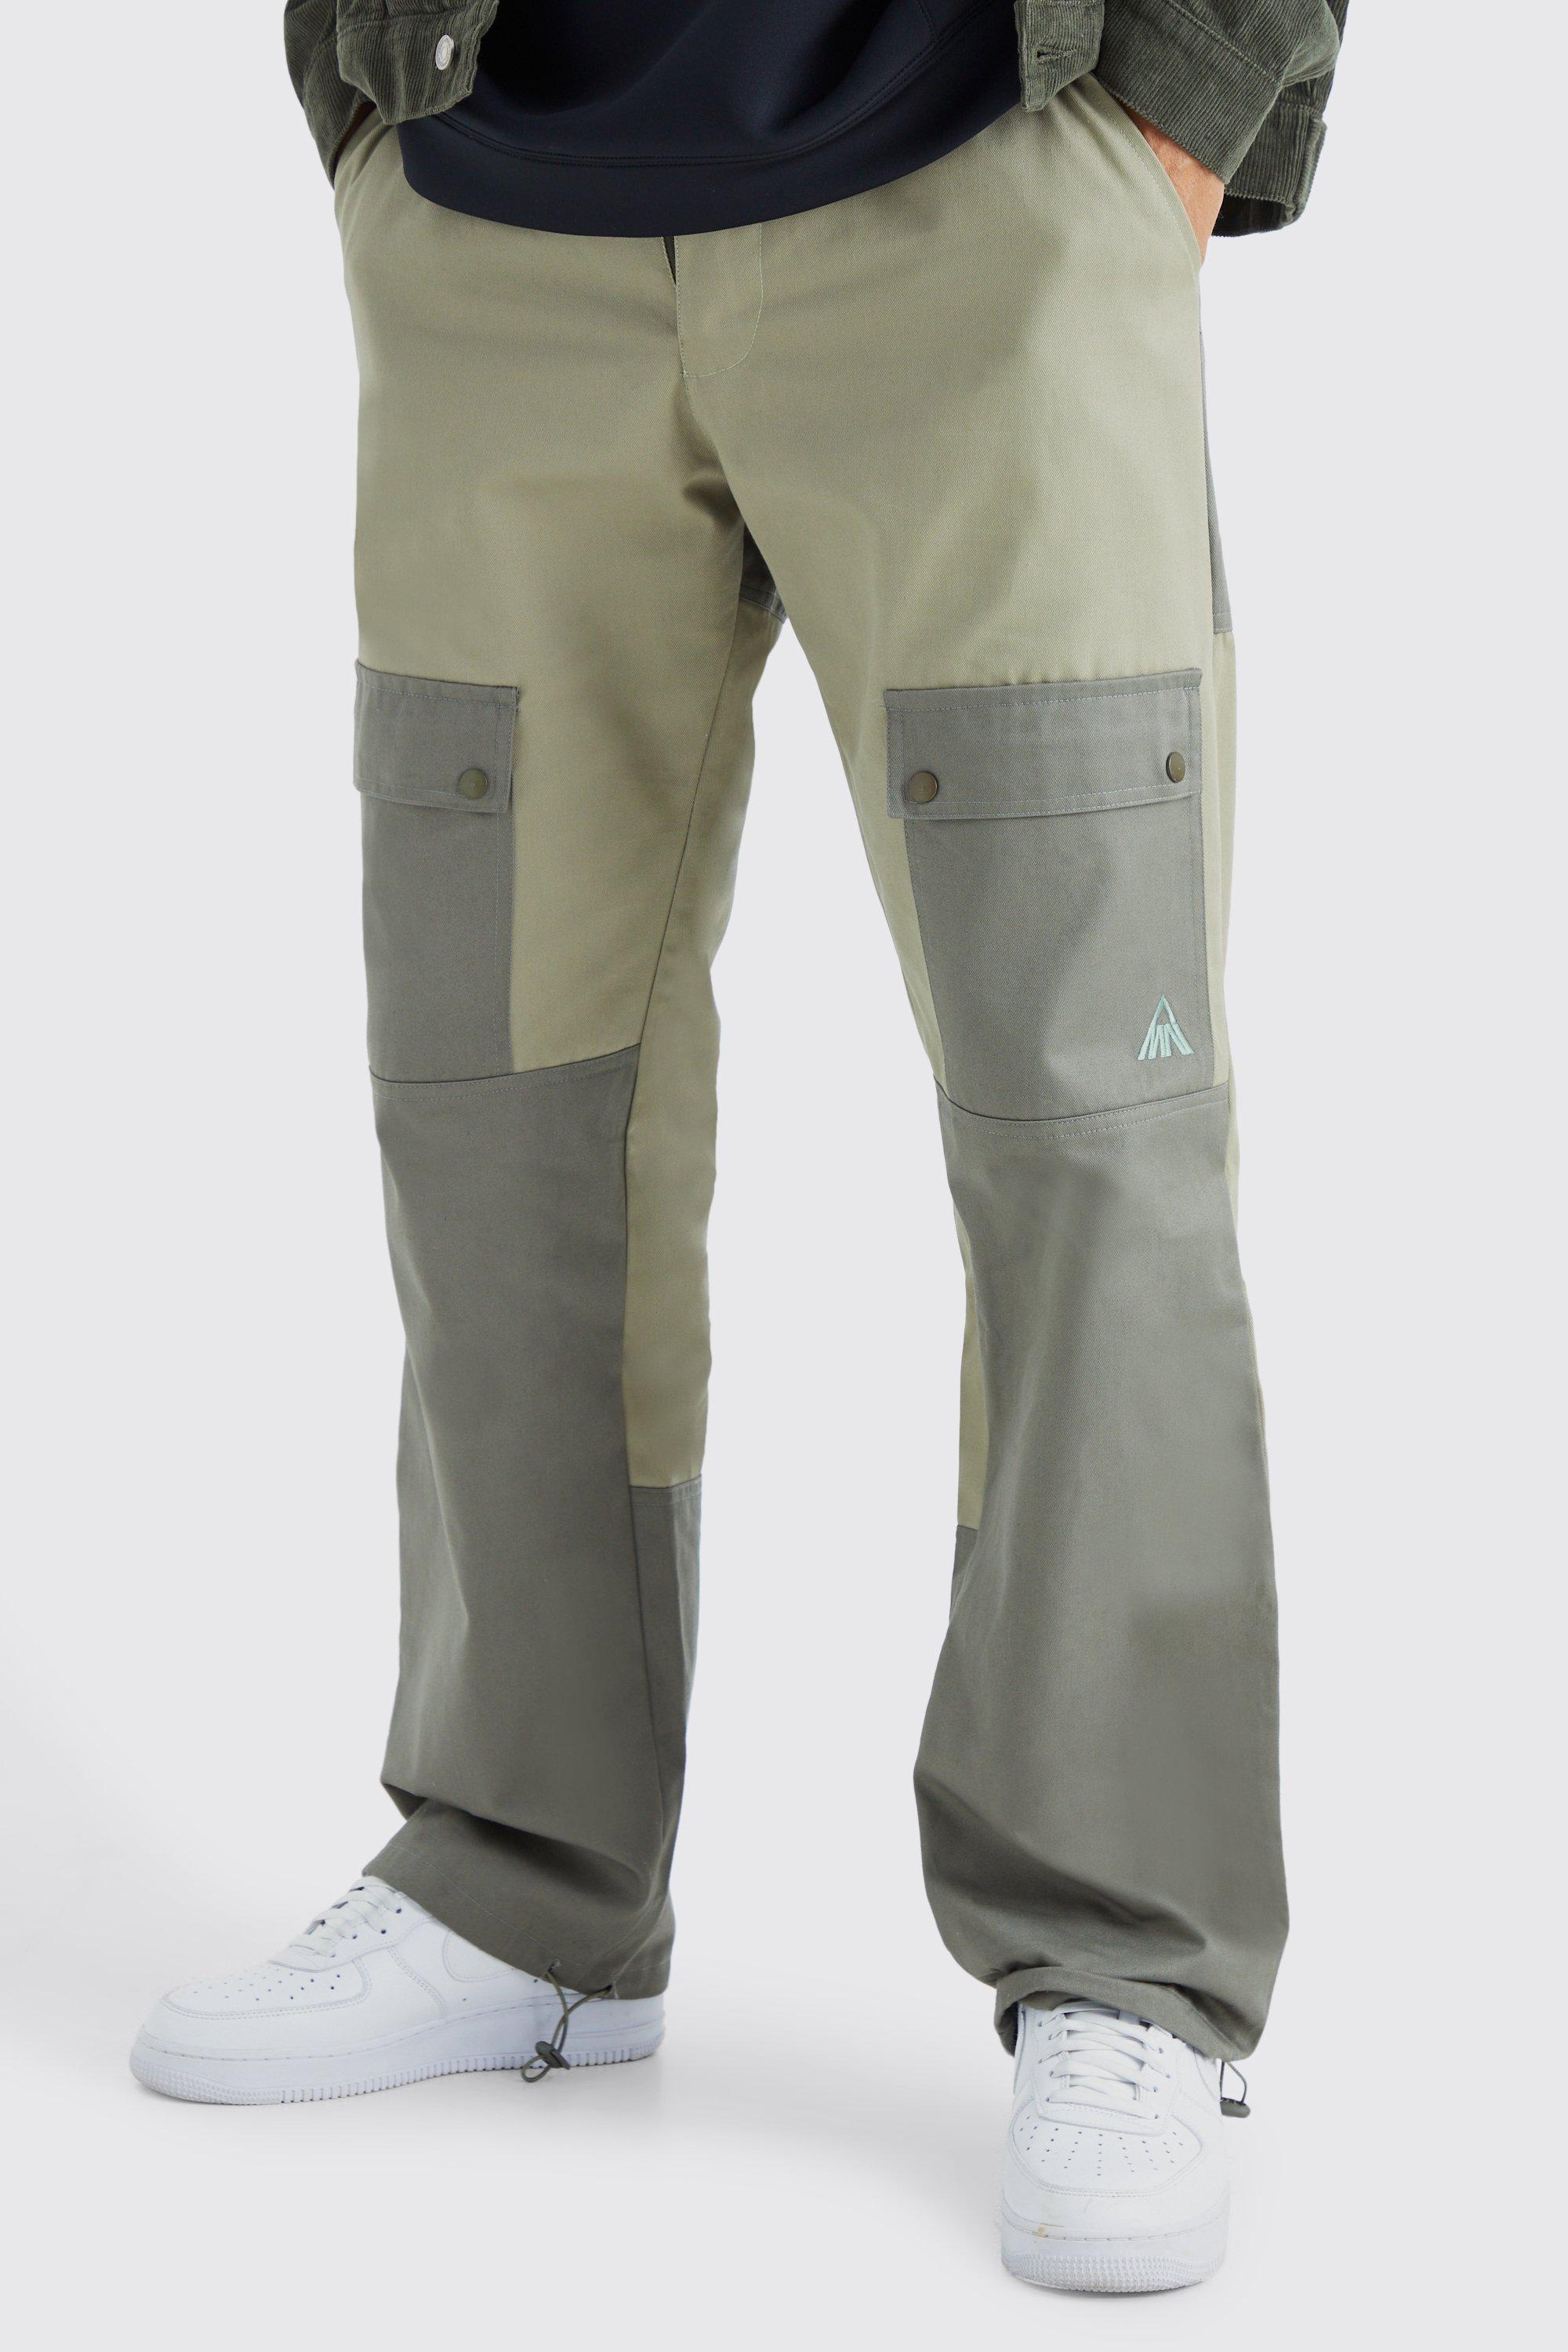 BoohooMAN Branded Plaque Twill Utility Trousers in Green for Men | Lyst